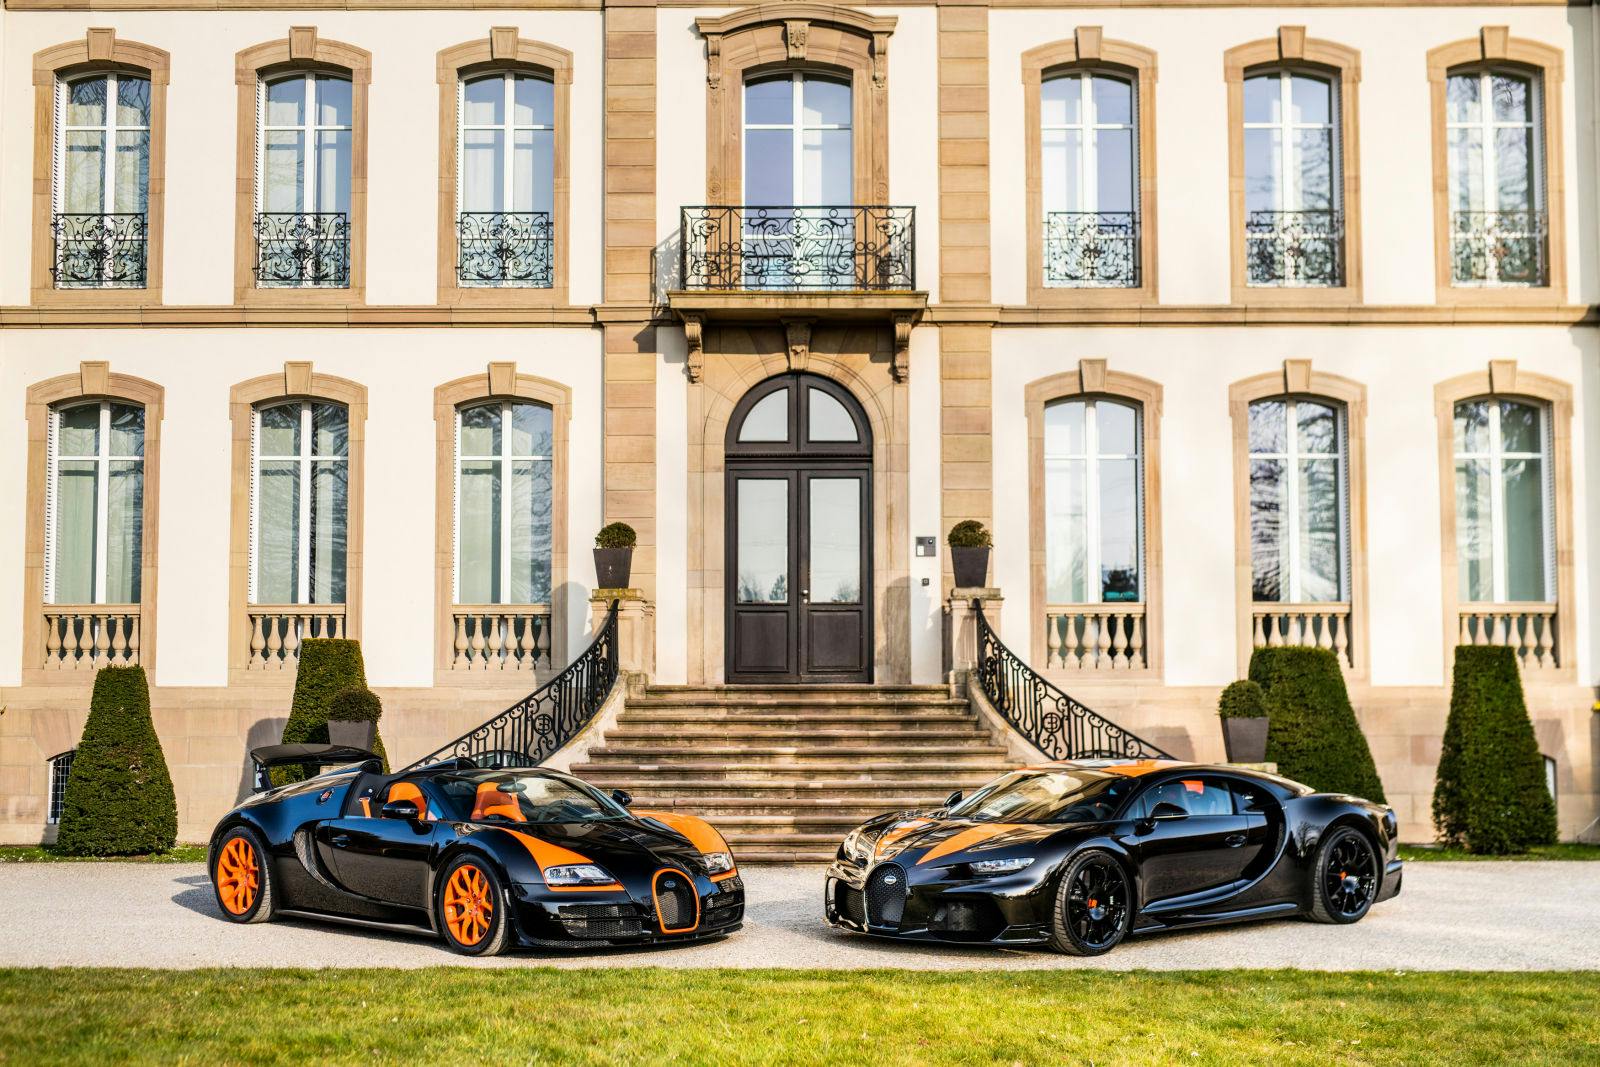 A new Chiron Super Sport 300+ and a certified Veyron Grand Sport Vitesse World Record Edition by “La Maison Pur Sang” were part of the ultimate handover experience created recently by Bugatti.